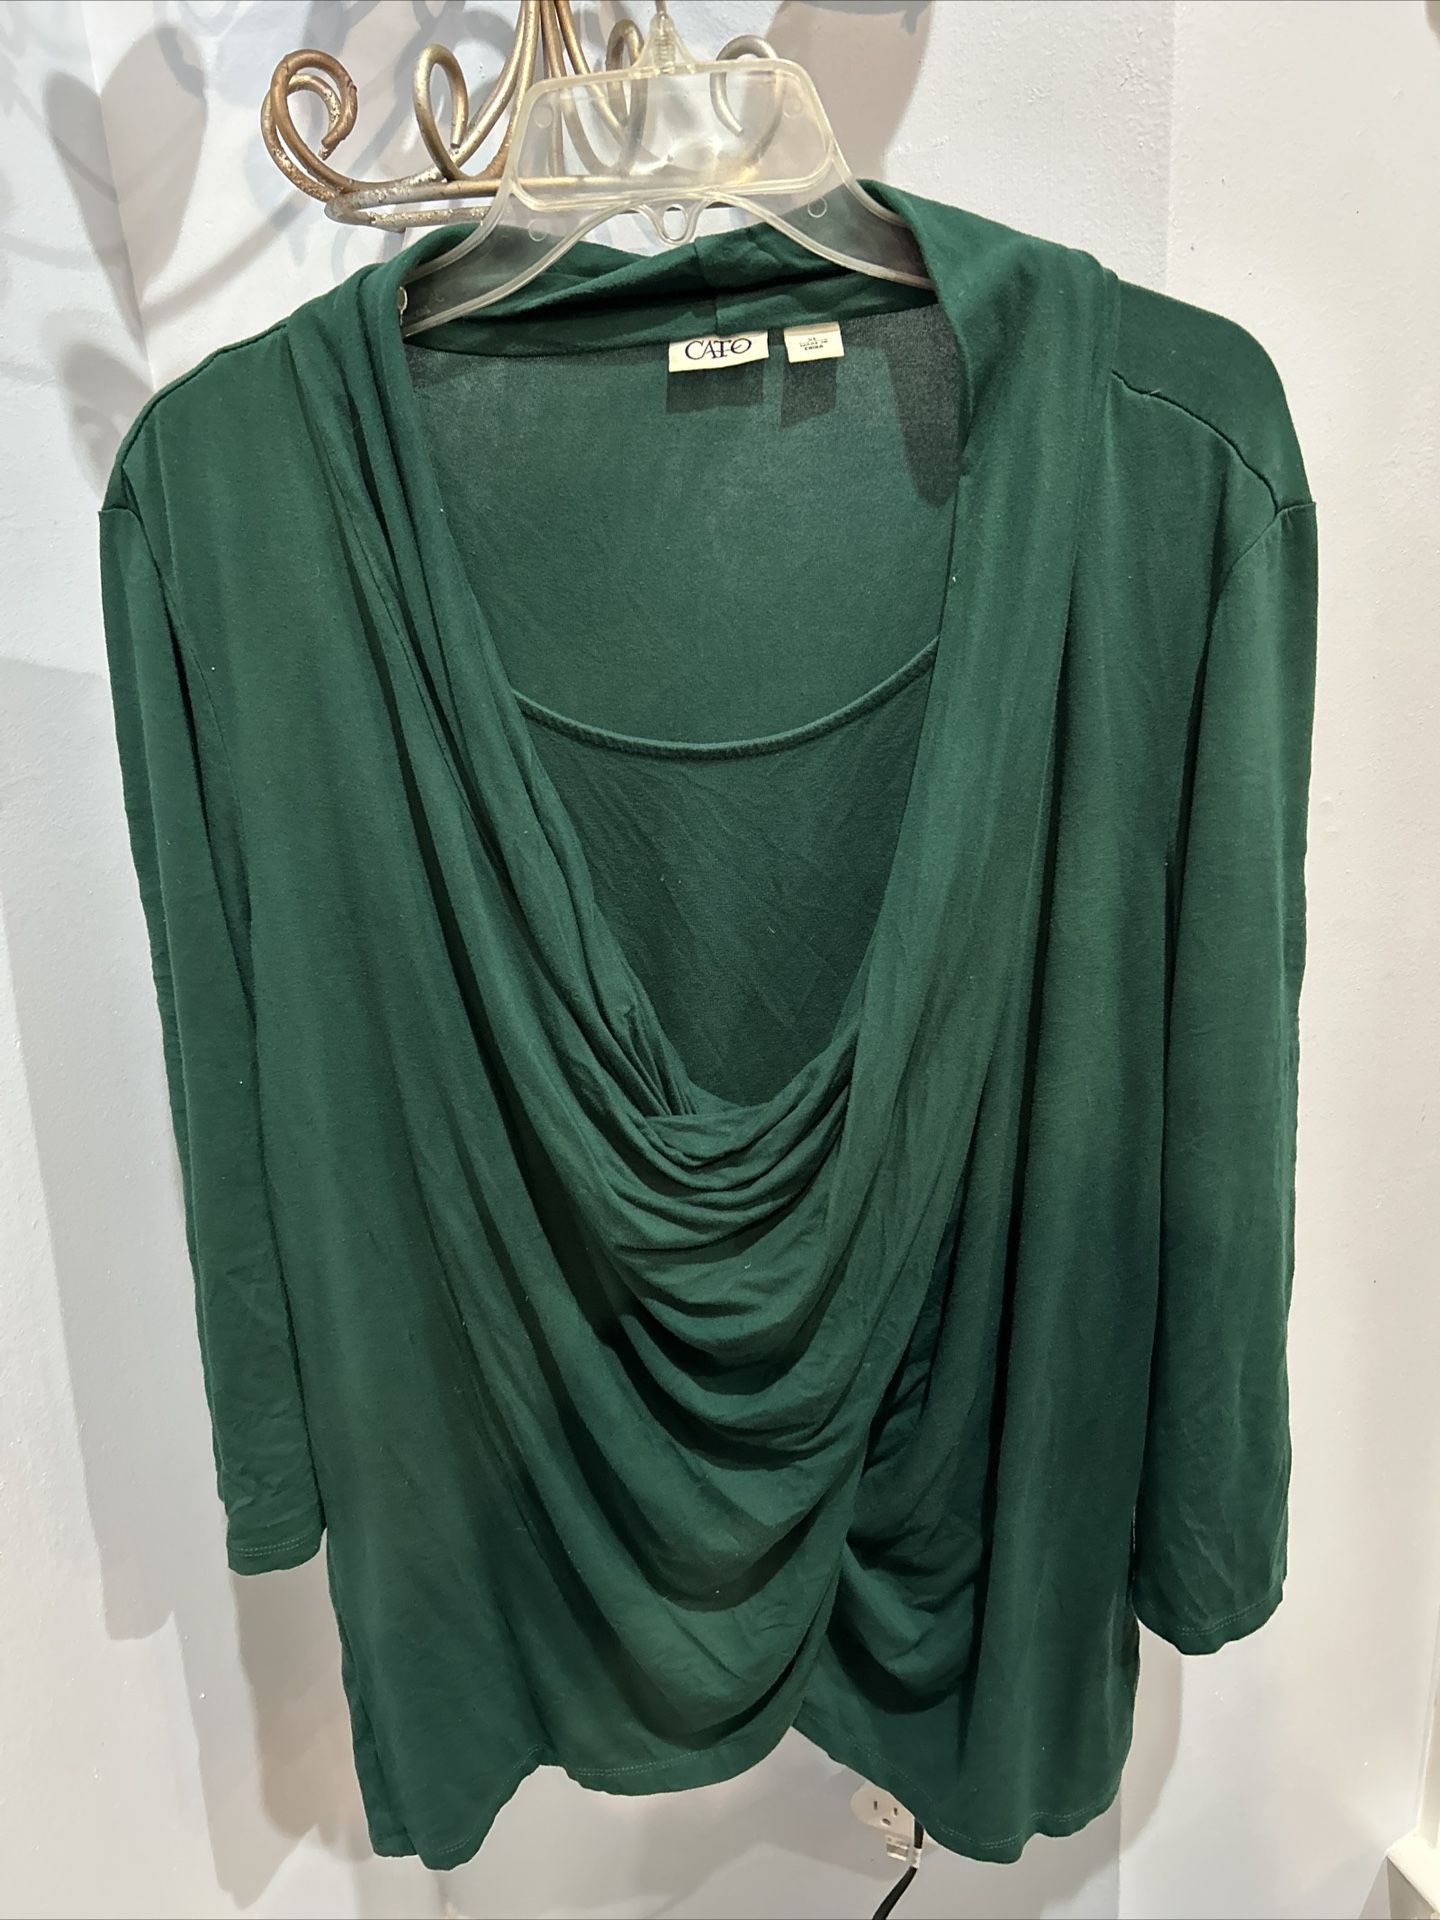 Cato Green Long Sleeve Blouse XL